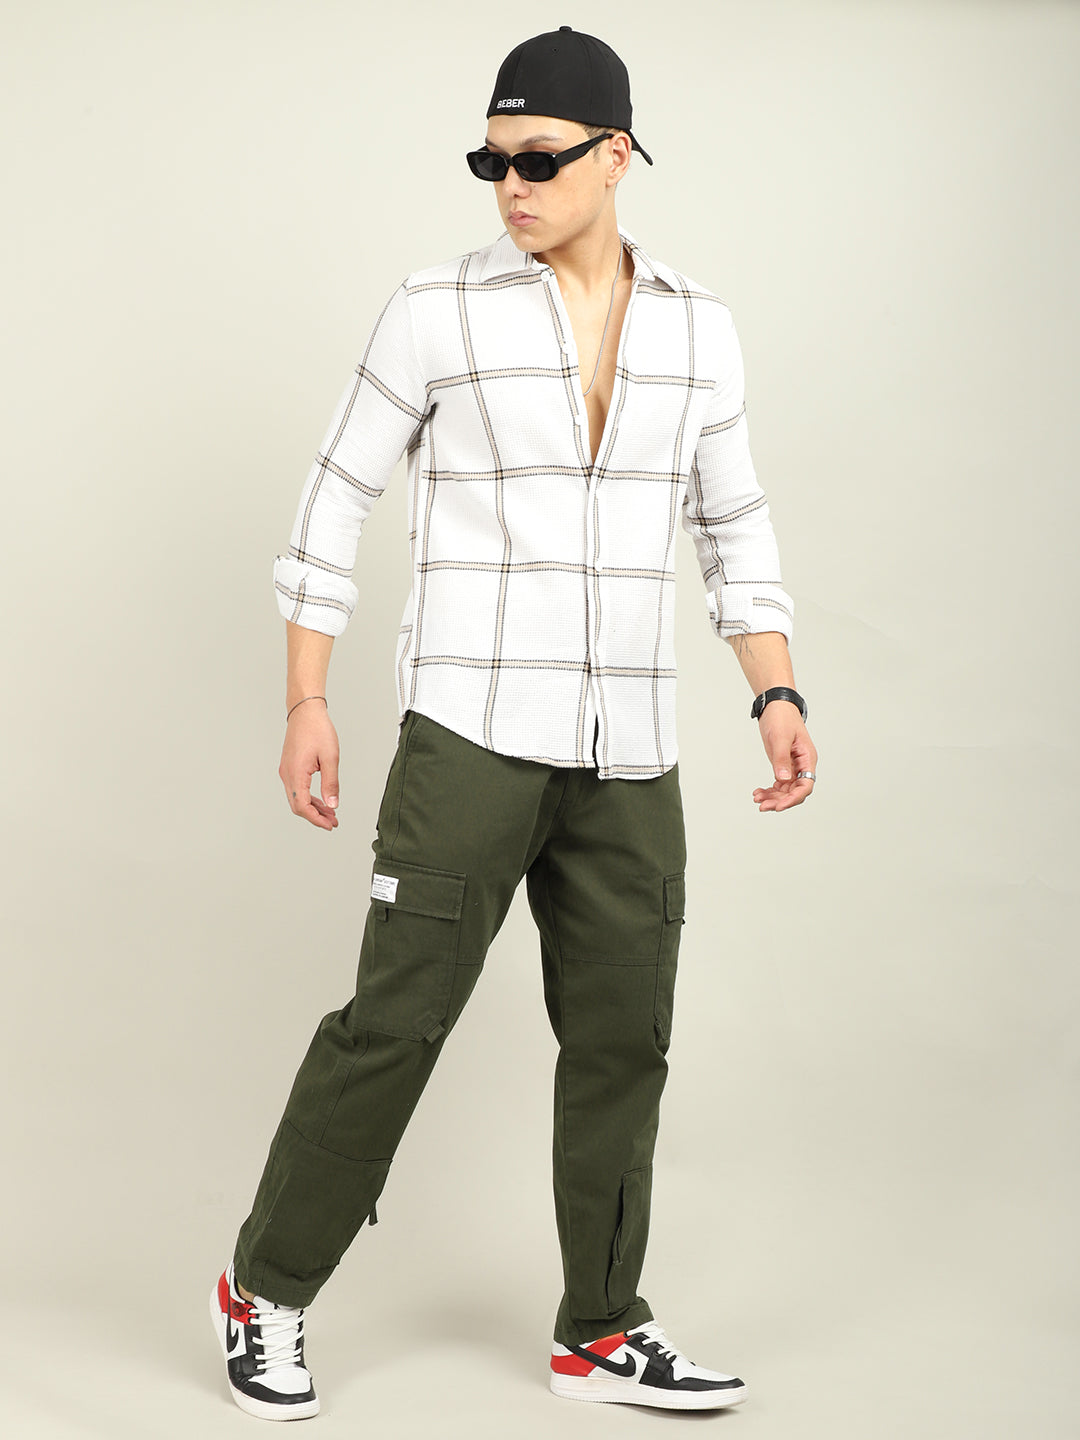 Drone Fantacy Olive Baggy Fit Cotton Cargo